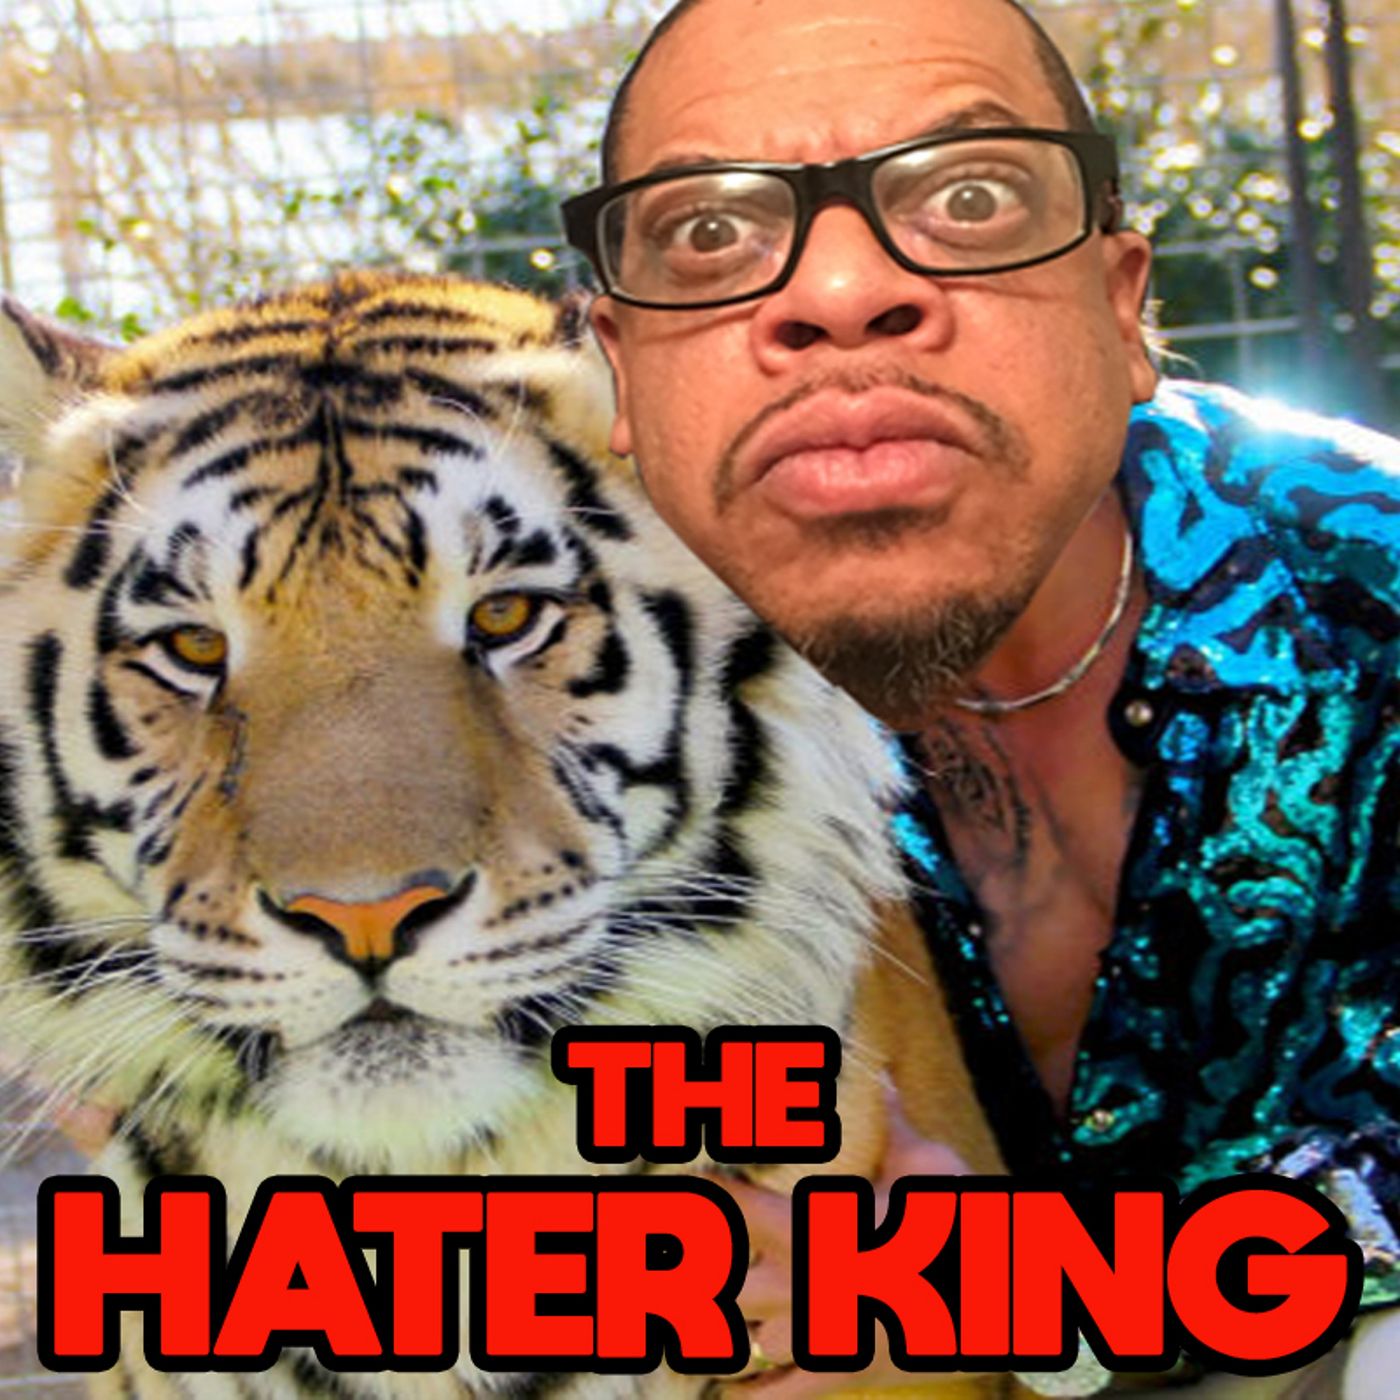 The Hater King